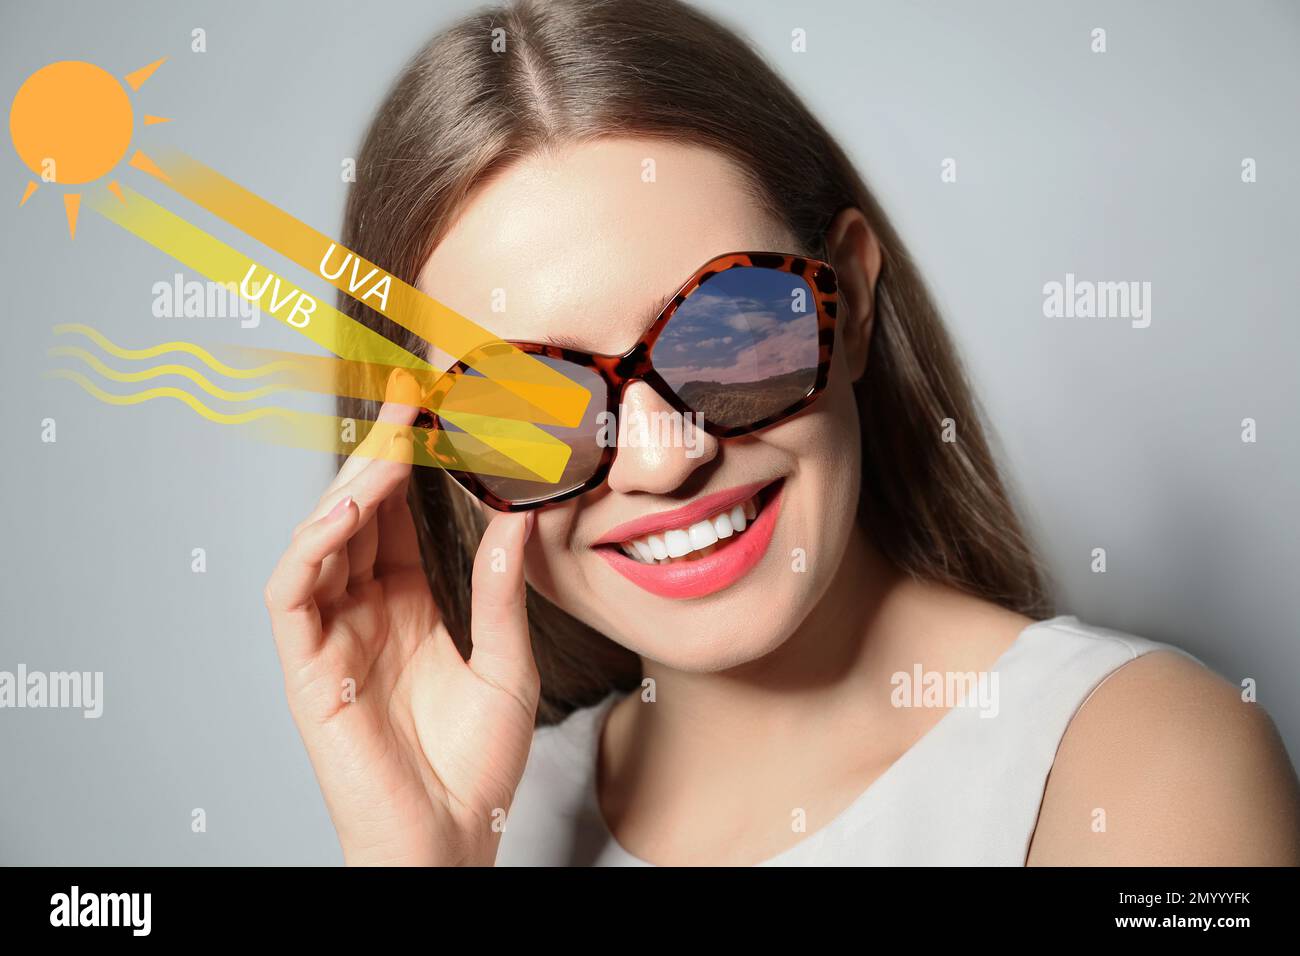 Woman wearing sunglasses, closeup. UVA and UVB rays reflected by lenses, illustration Stock Photo